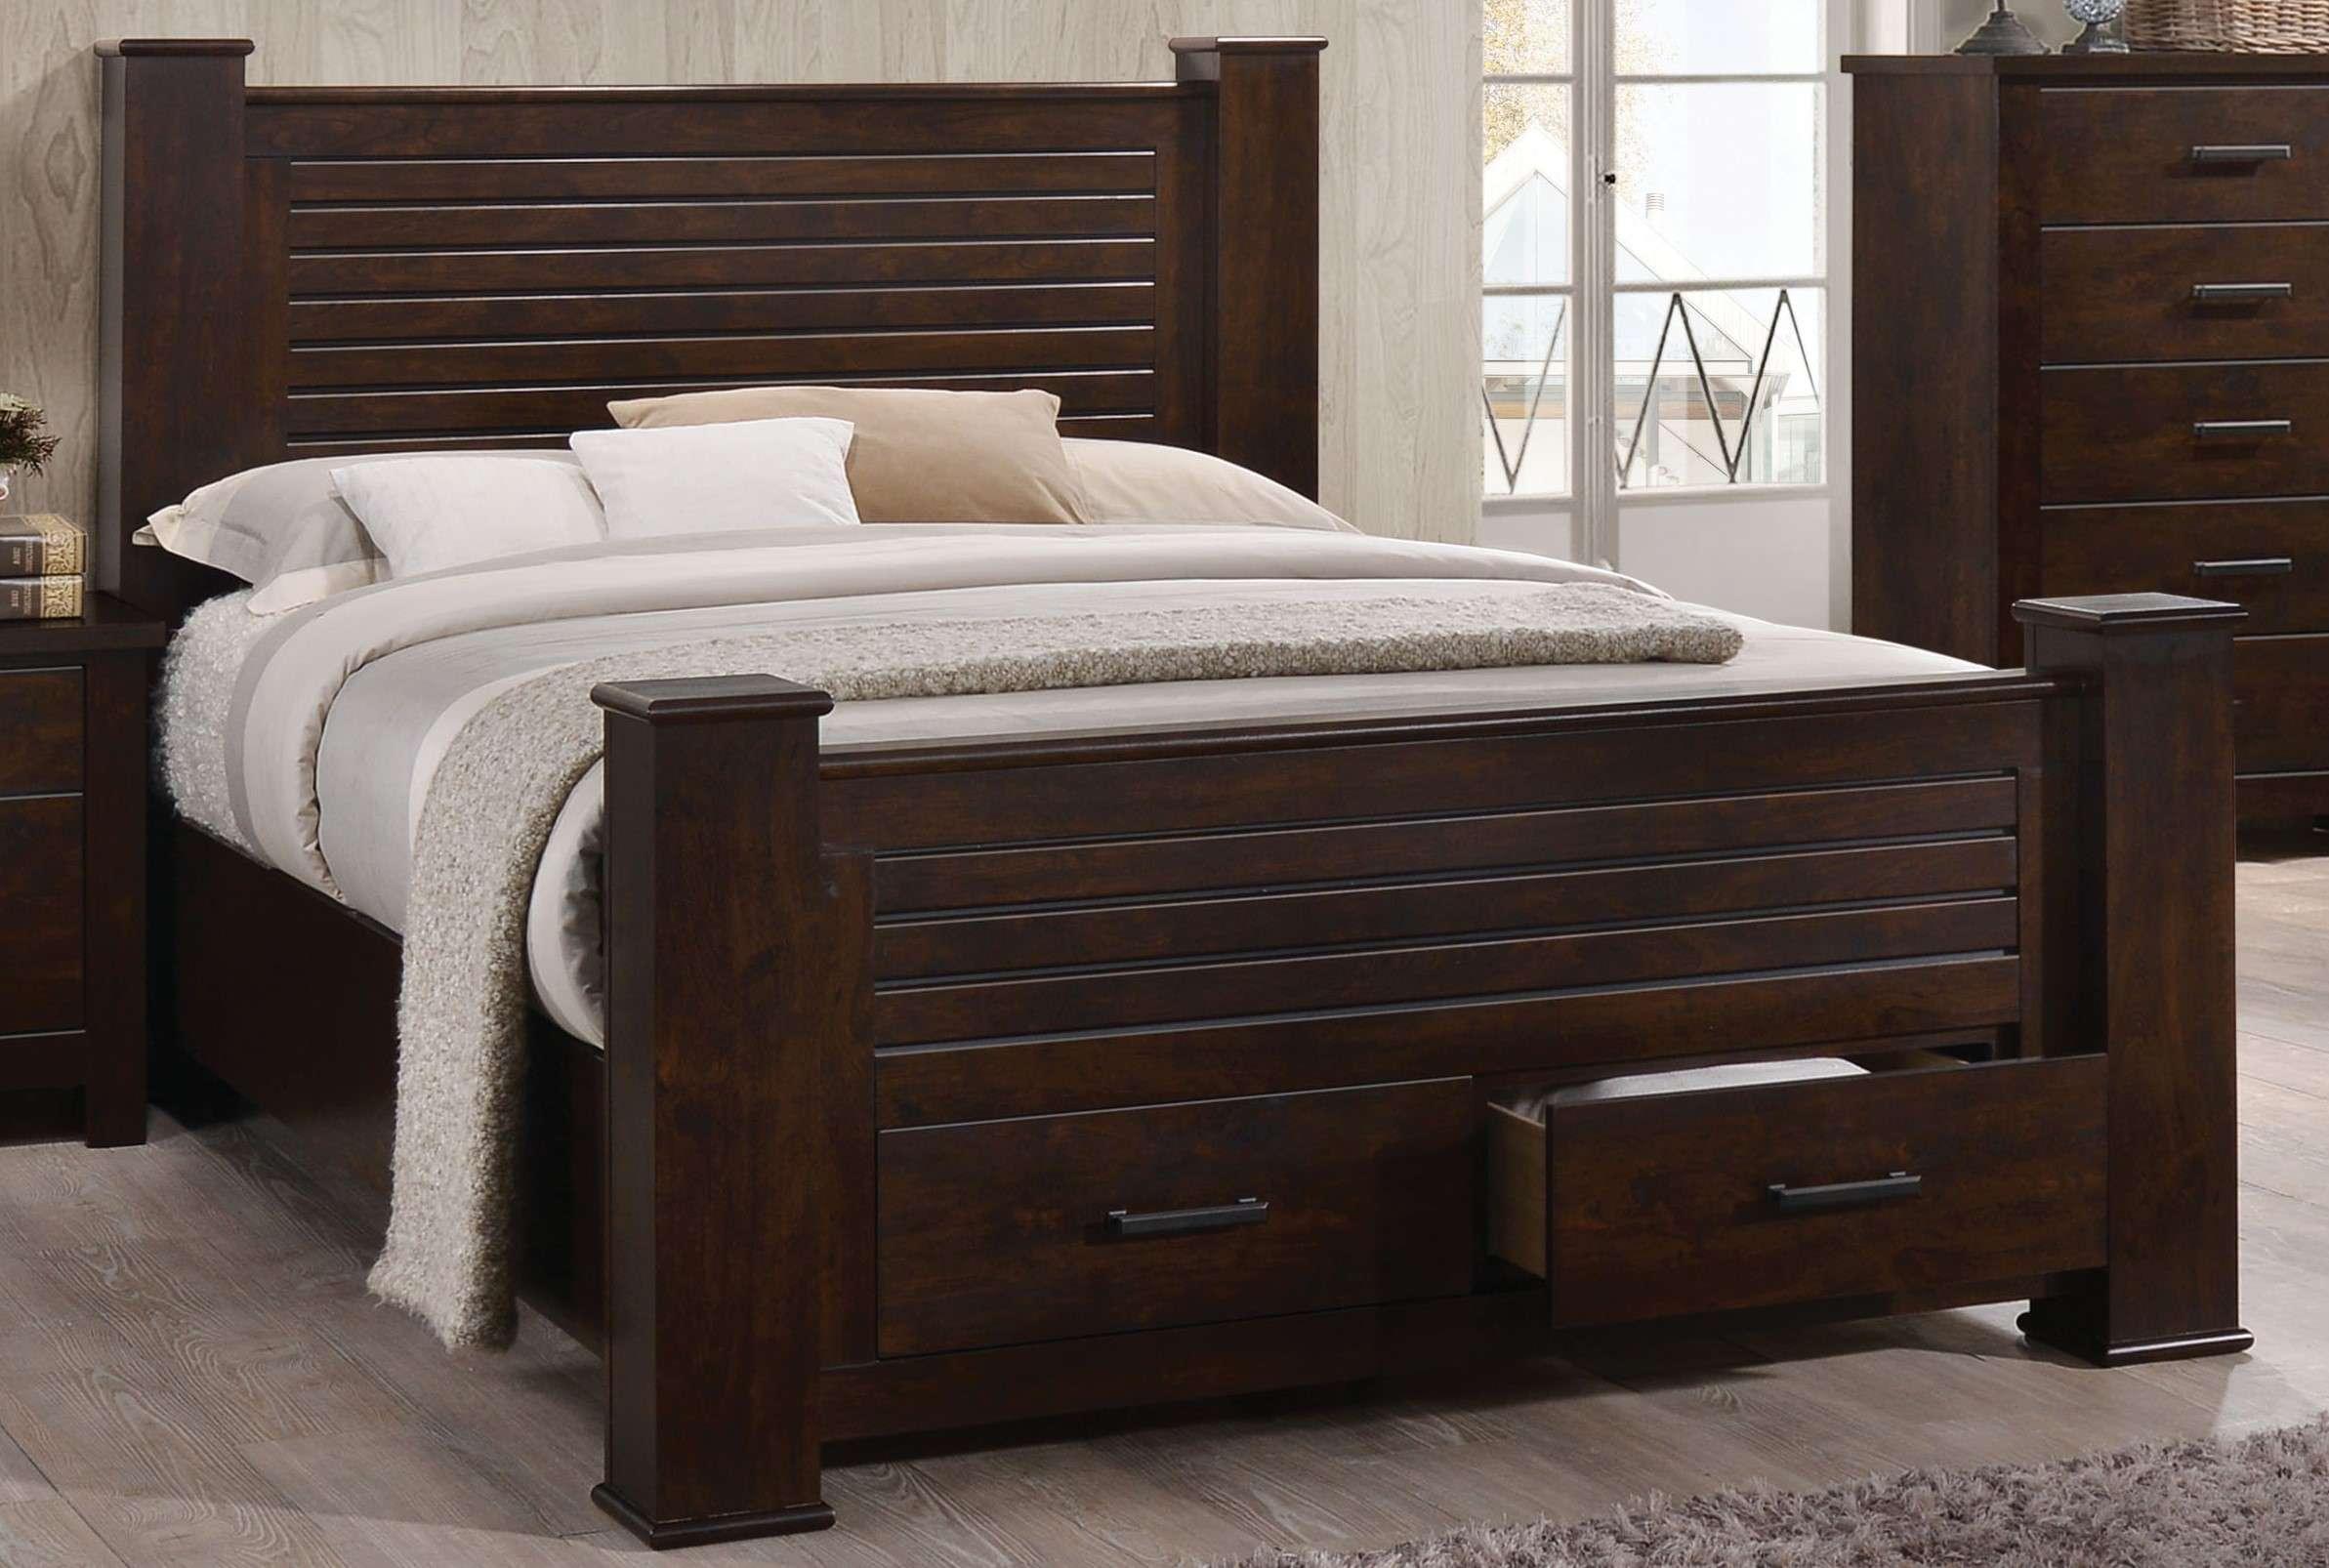 Transitional Storage Bed Panang-23370Q 23370Q in Mahogany Matte Lacquer